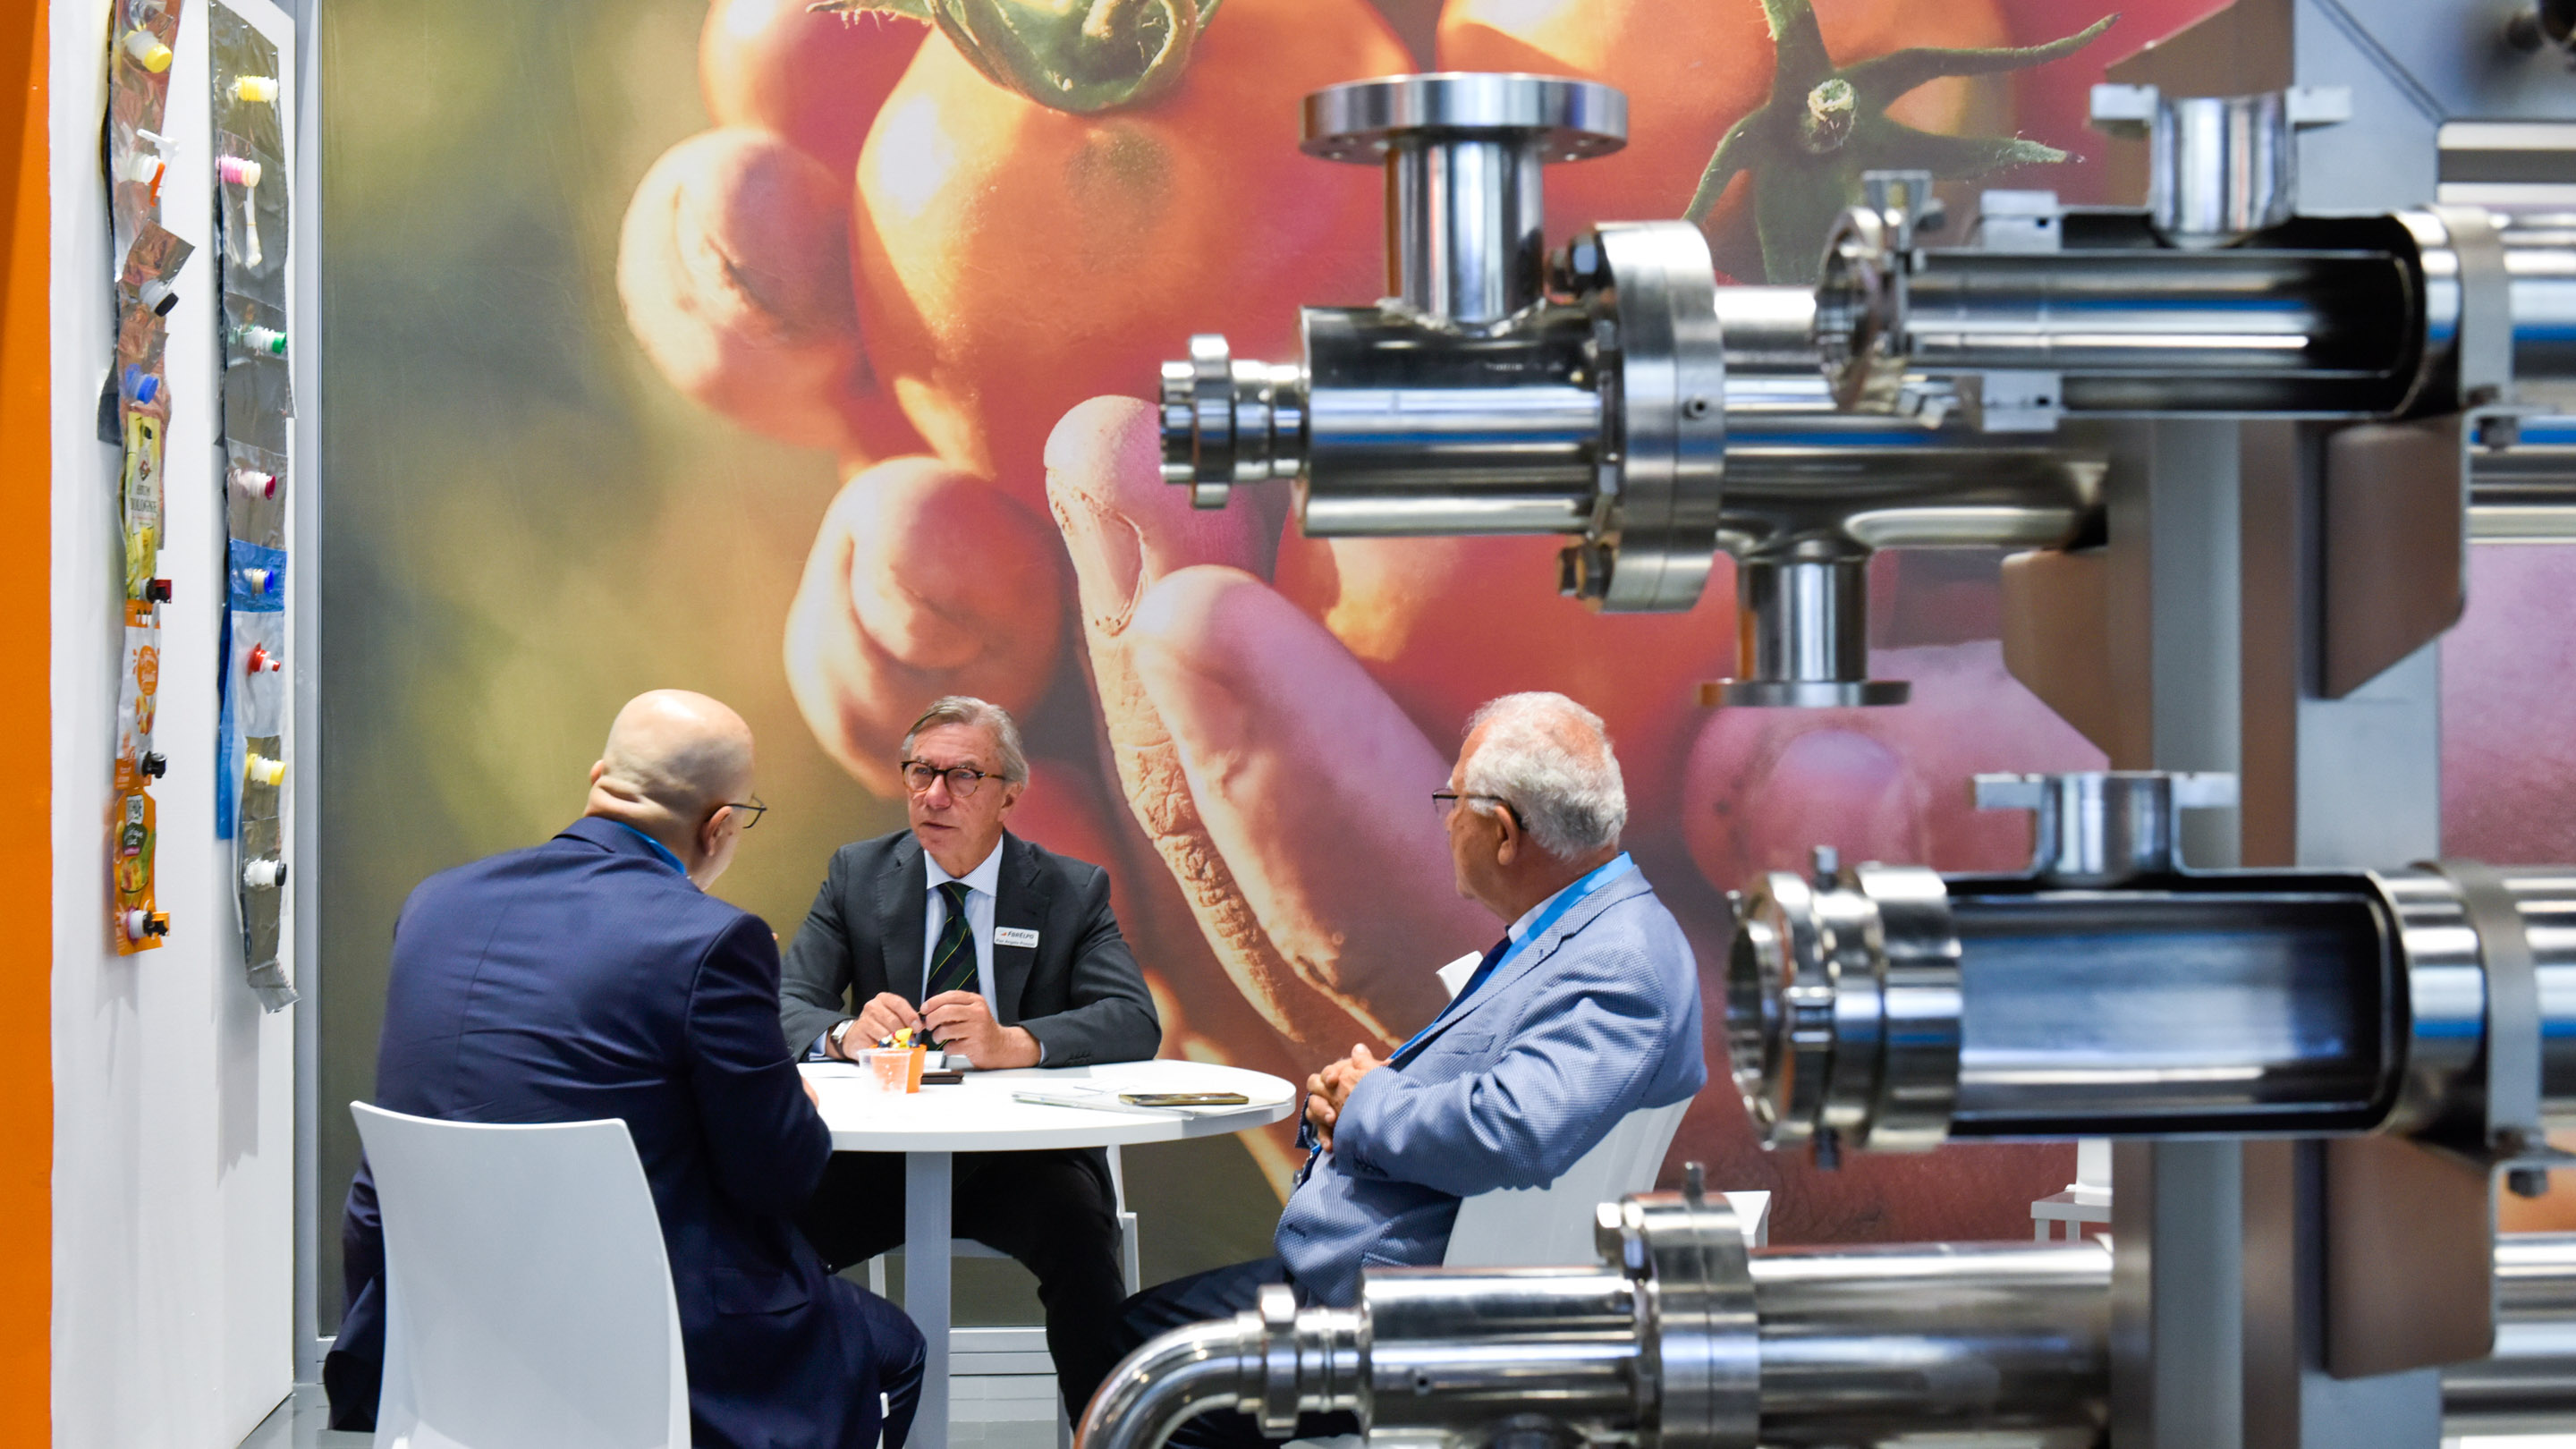 Stand: Fbr Elpo, Food Processing, Halle 10.1